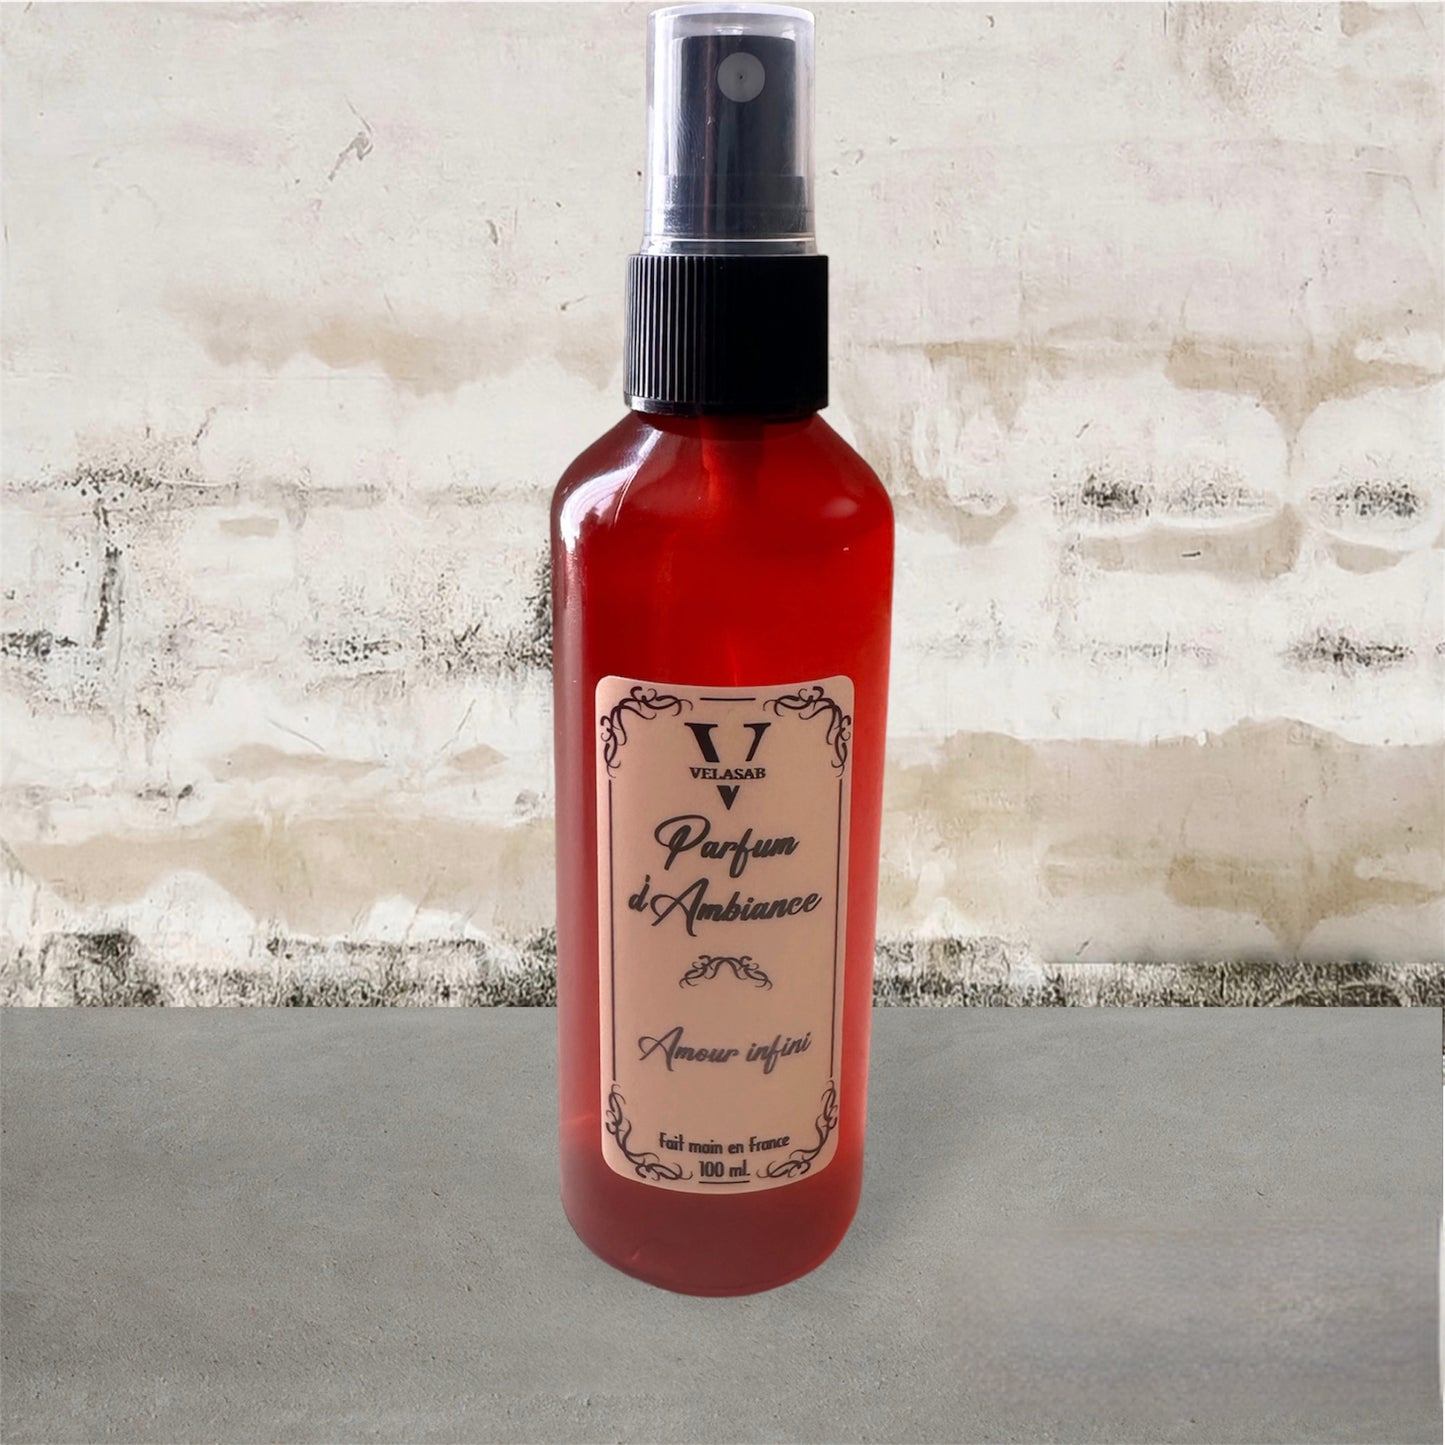 Spray d'ambiance Amour infini